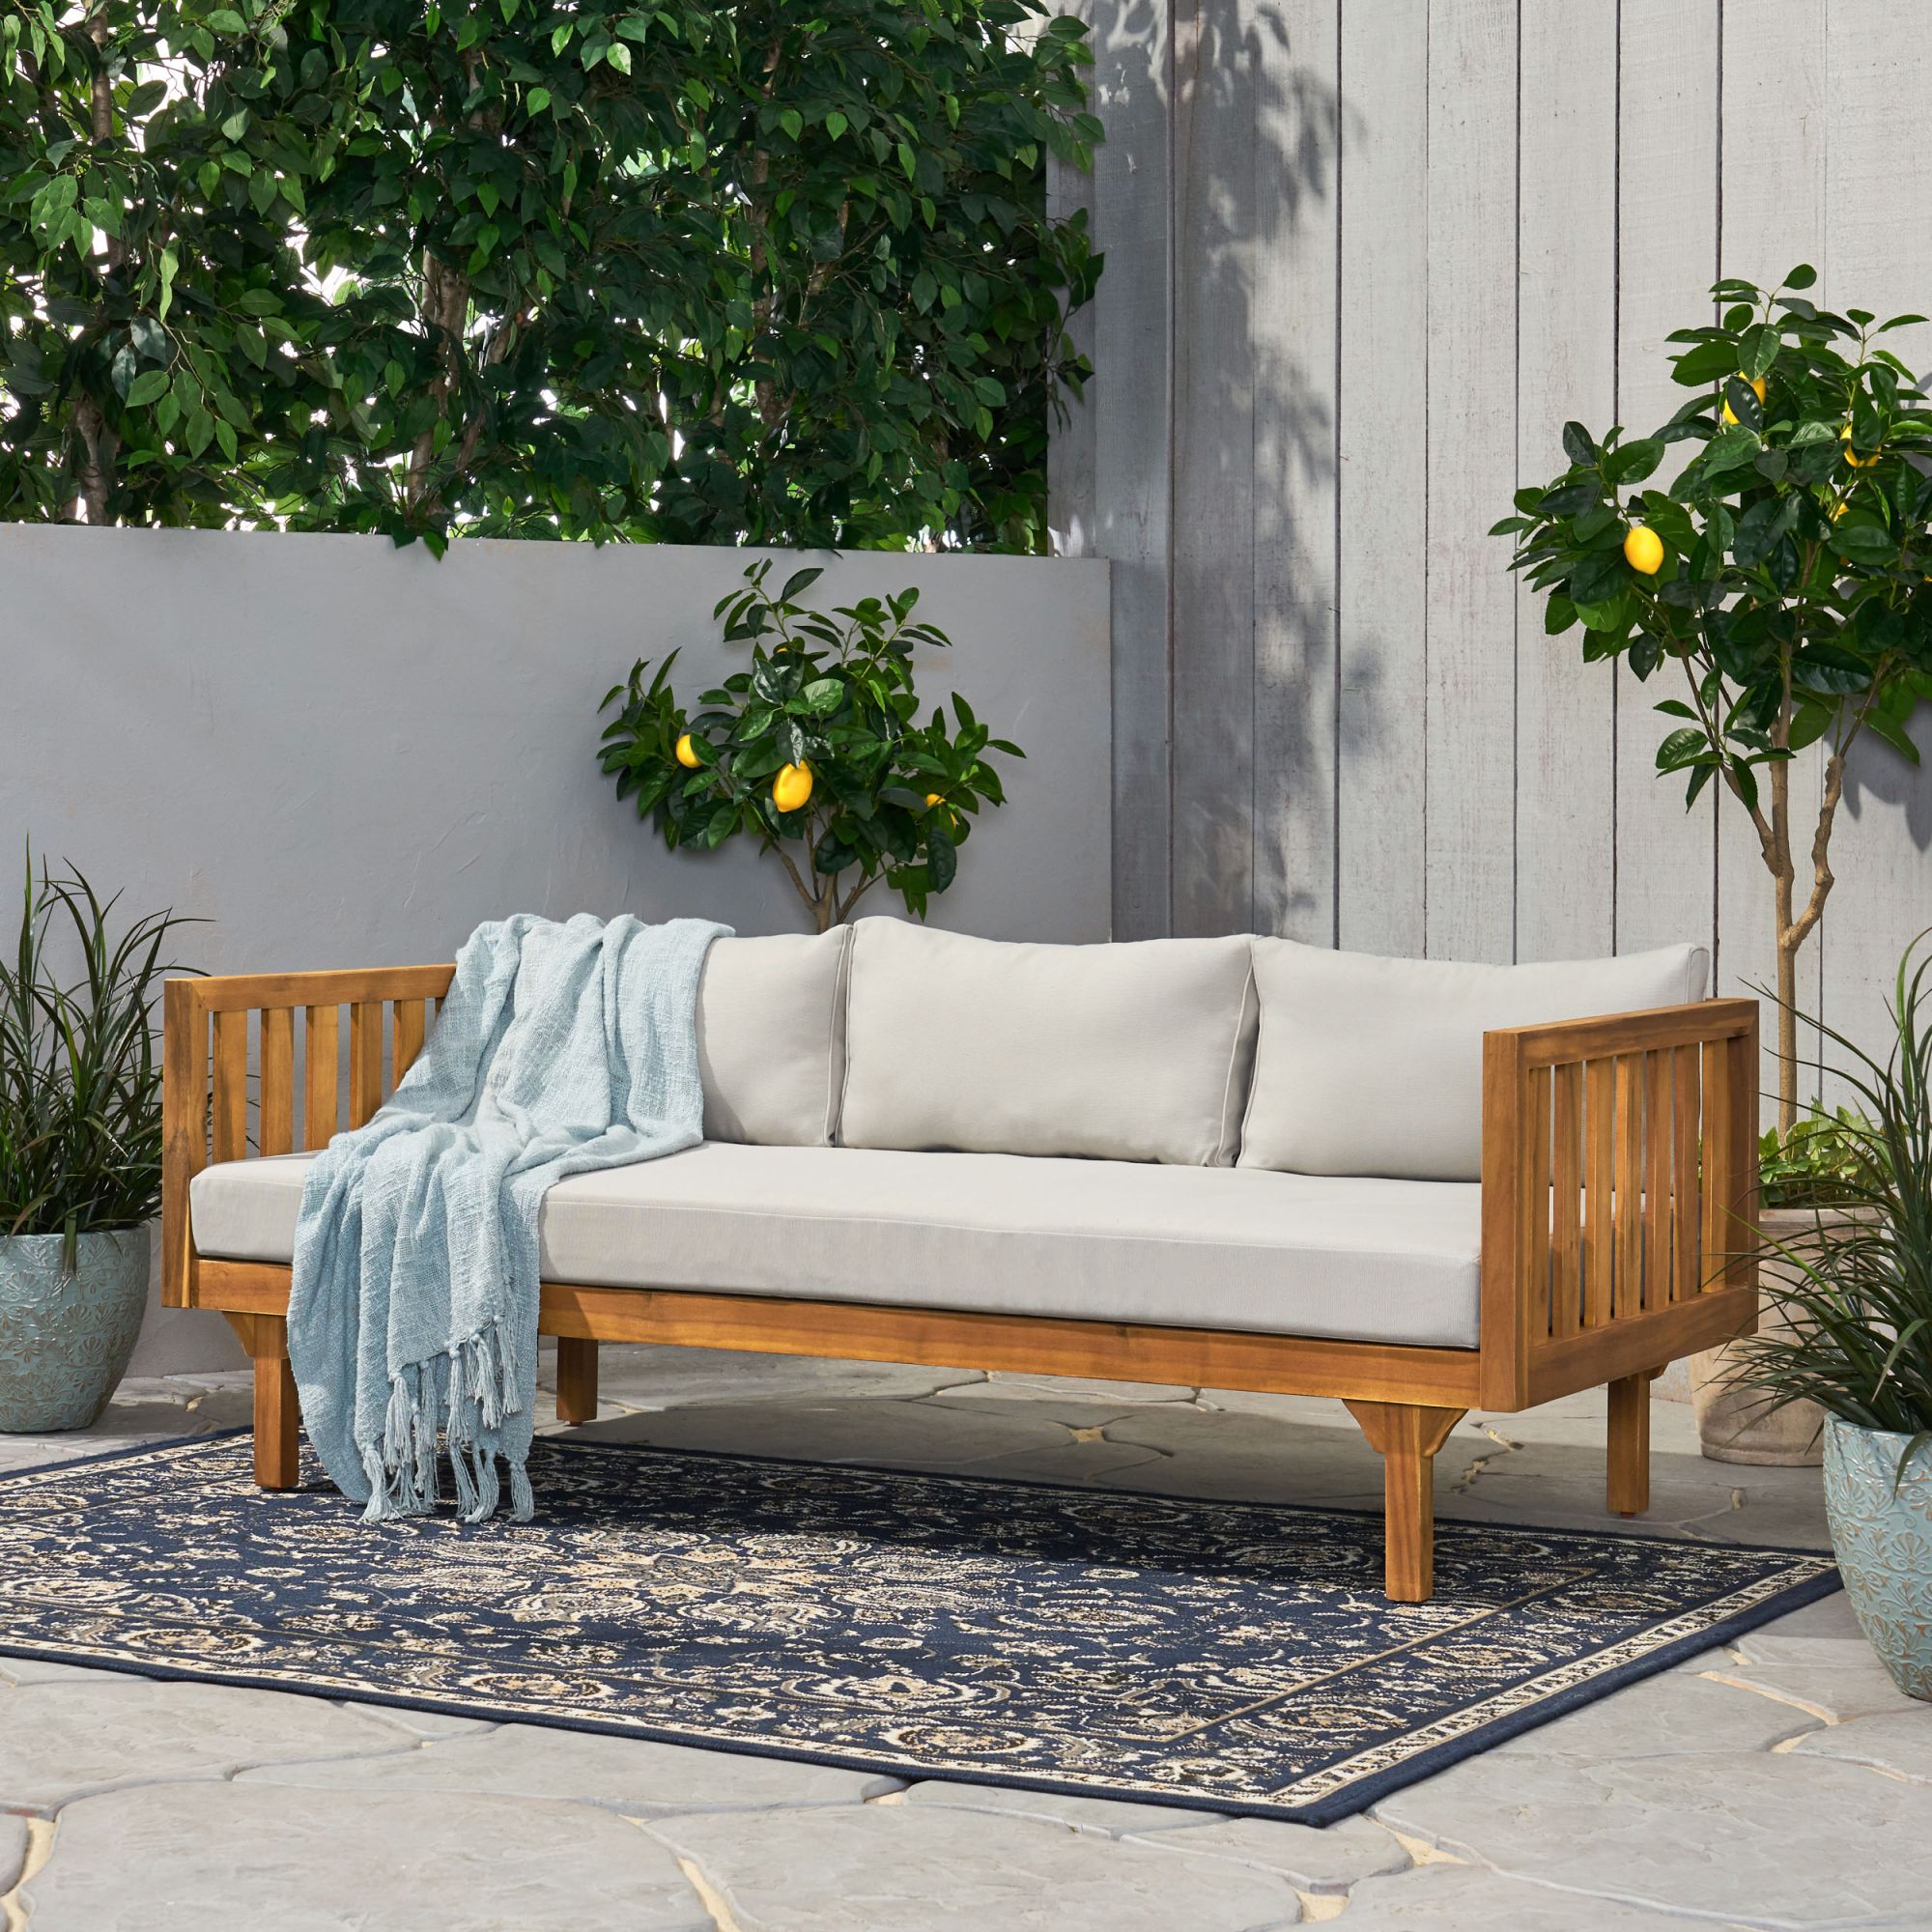 Claremont Outdoor 3 Seater Acacia Wood Daybed, Teak and Beige in